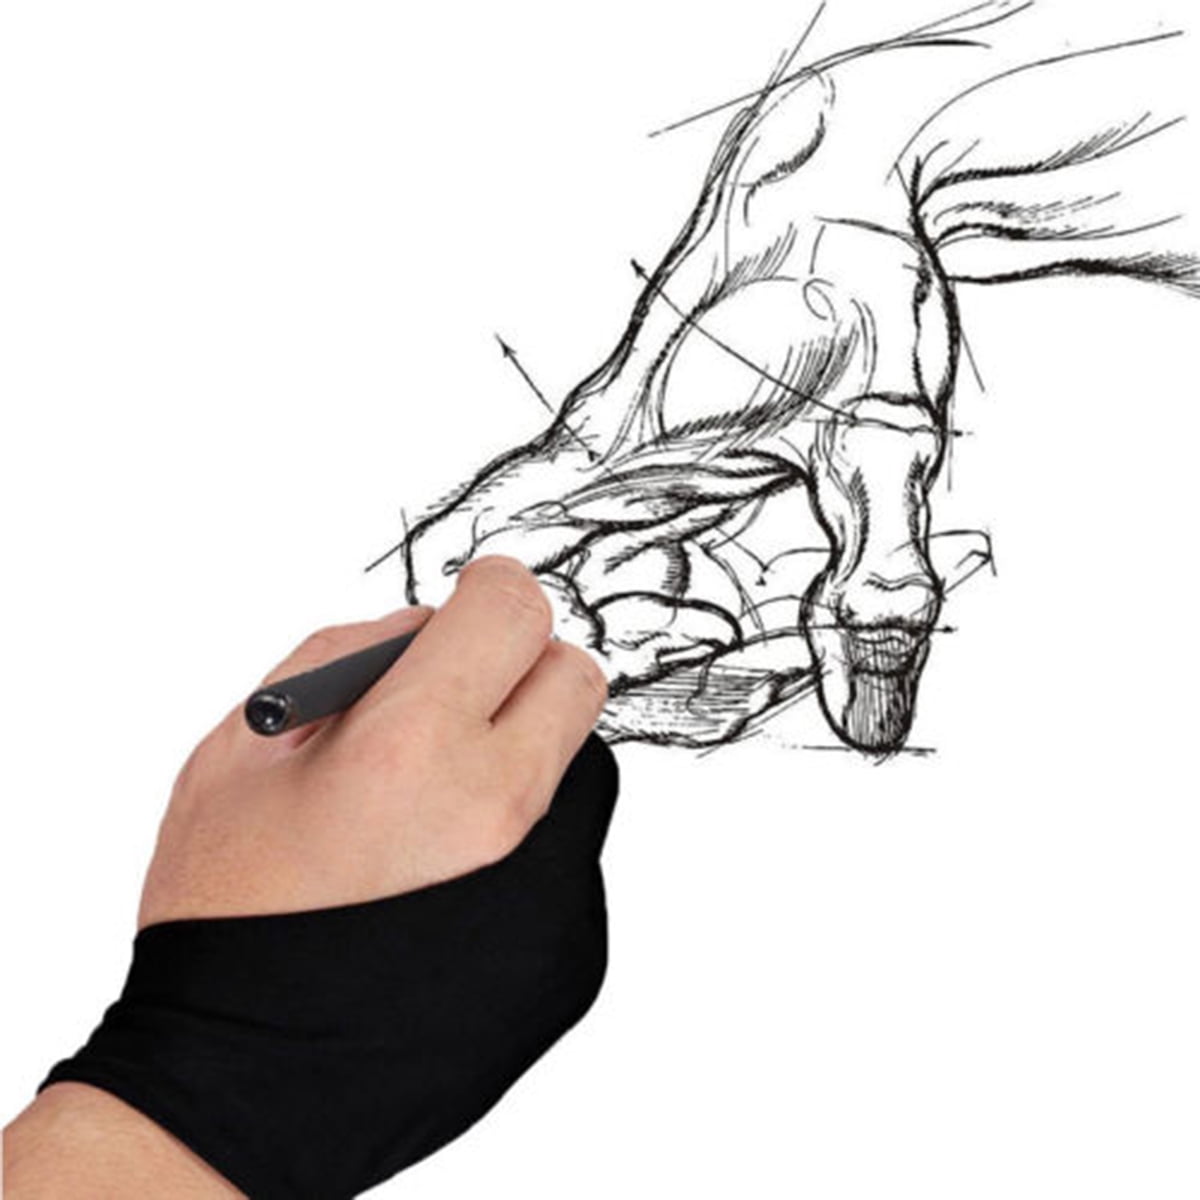 New Design Left or Right Hand Glove: Drawings, Graphics